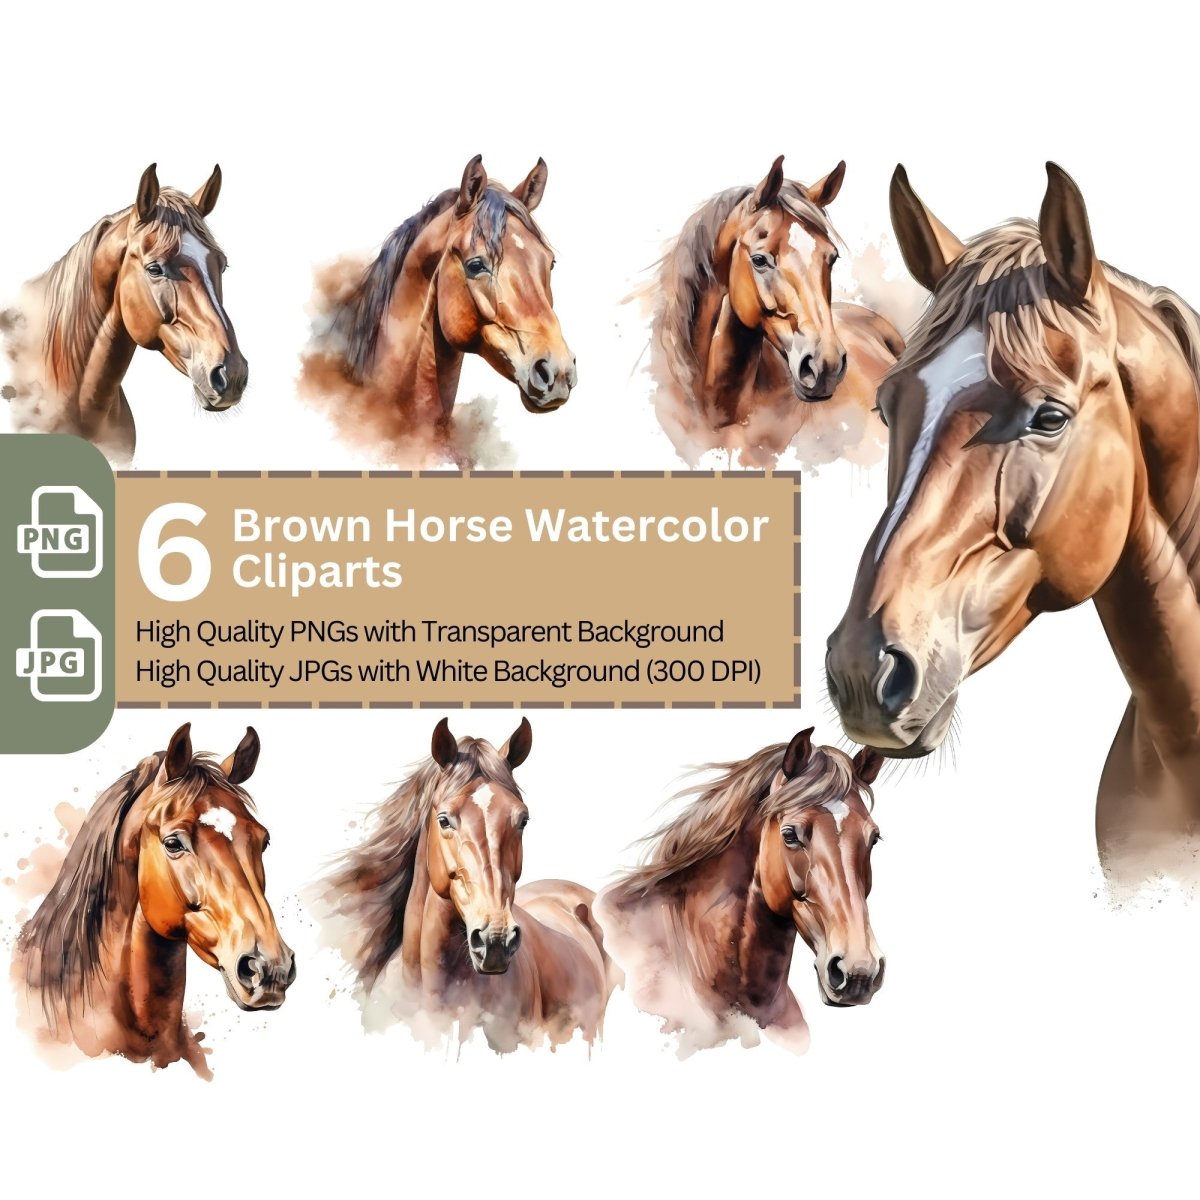 Brown Horse Cliparts 6+6 High Quality PNGs Animal Clipart - Everything Pixel